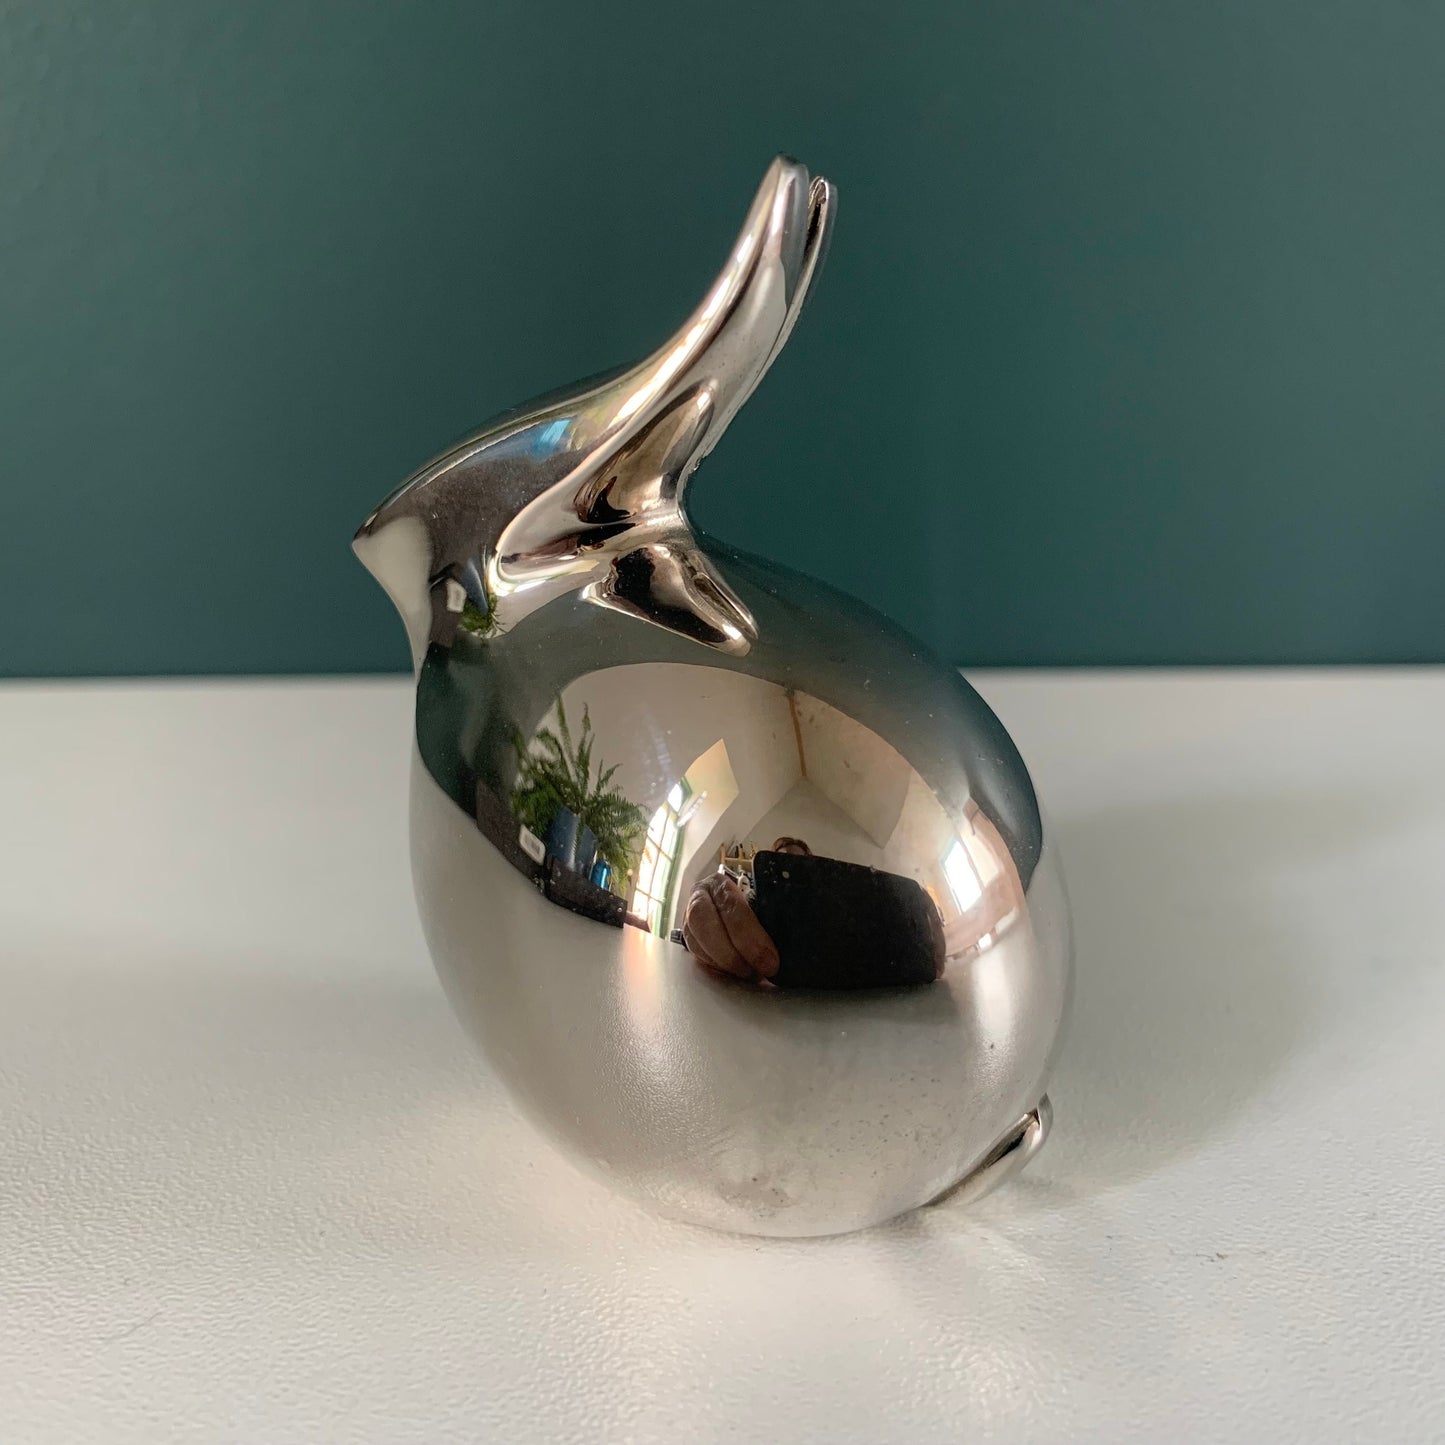 Dansk Silver Bunny Rabbit Paperweight Boxed Danish Designs Gifts Office Work Job Presents Retro